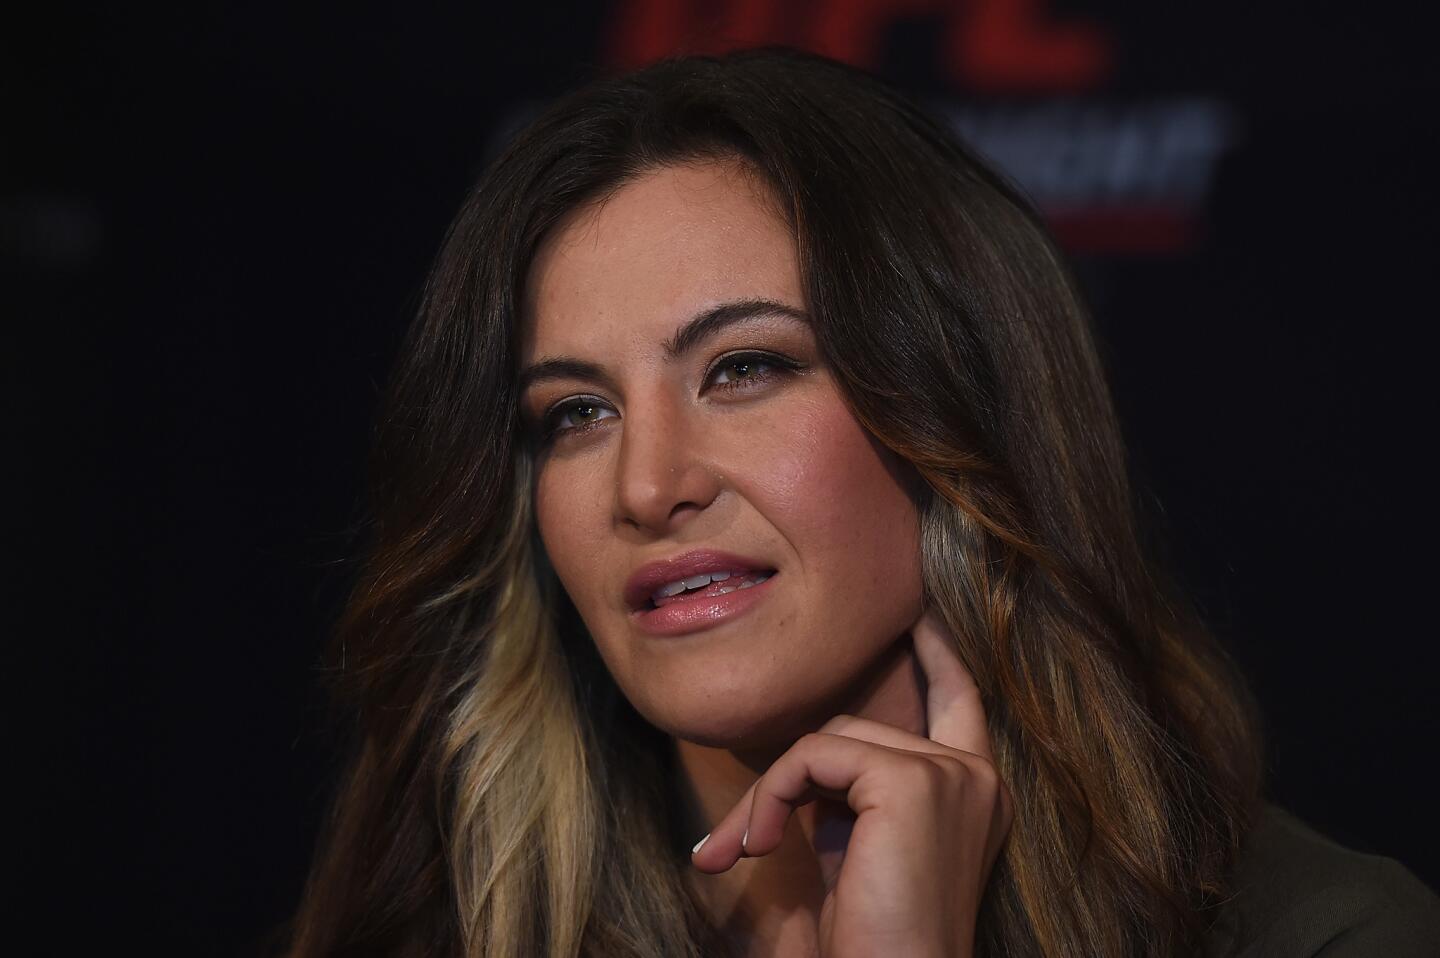 BRISBANE, AUSTRALIA - MARCH 18: UFC women's bantamweight champion Miesha Tate speaks to media during the Ultimate Media Day on March 18, 2016 in Brisbane, Australia. (Photo by Matt Roberts/Getty Images) ** OUTS - ELSENT, FPG, CM - OUTS * NM, PH, VA if sourced by CT, LA or MoD **